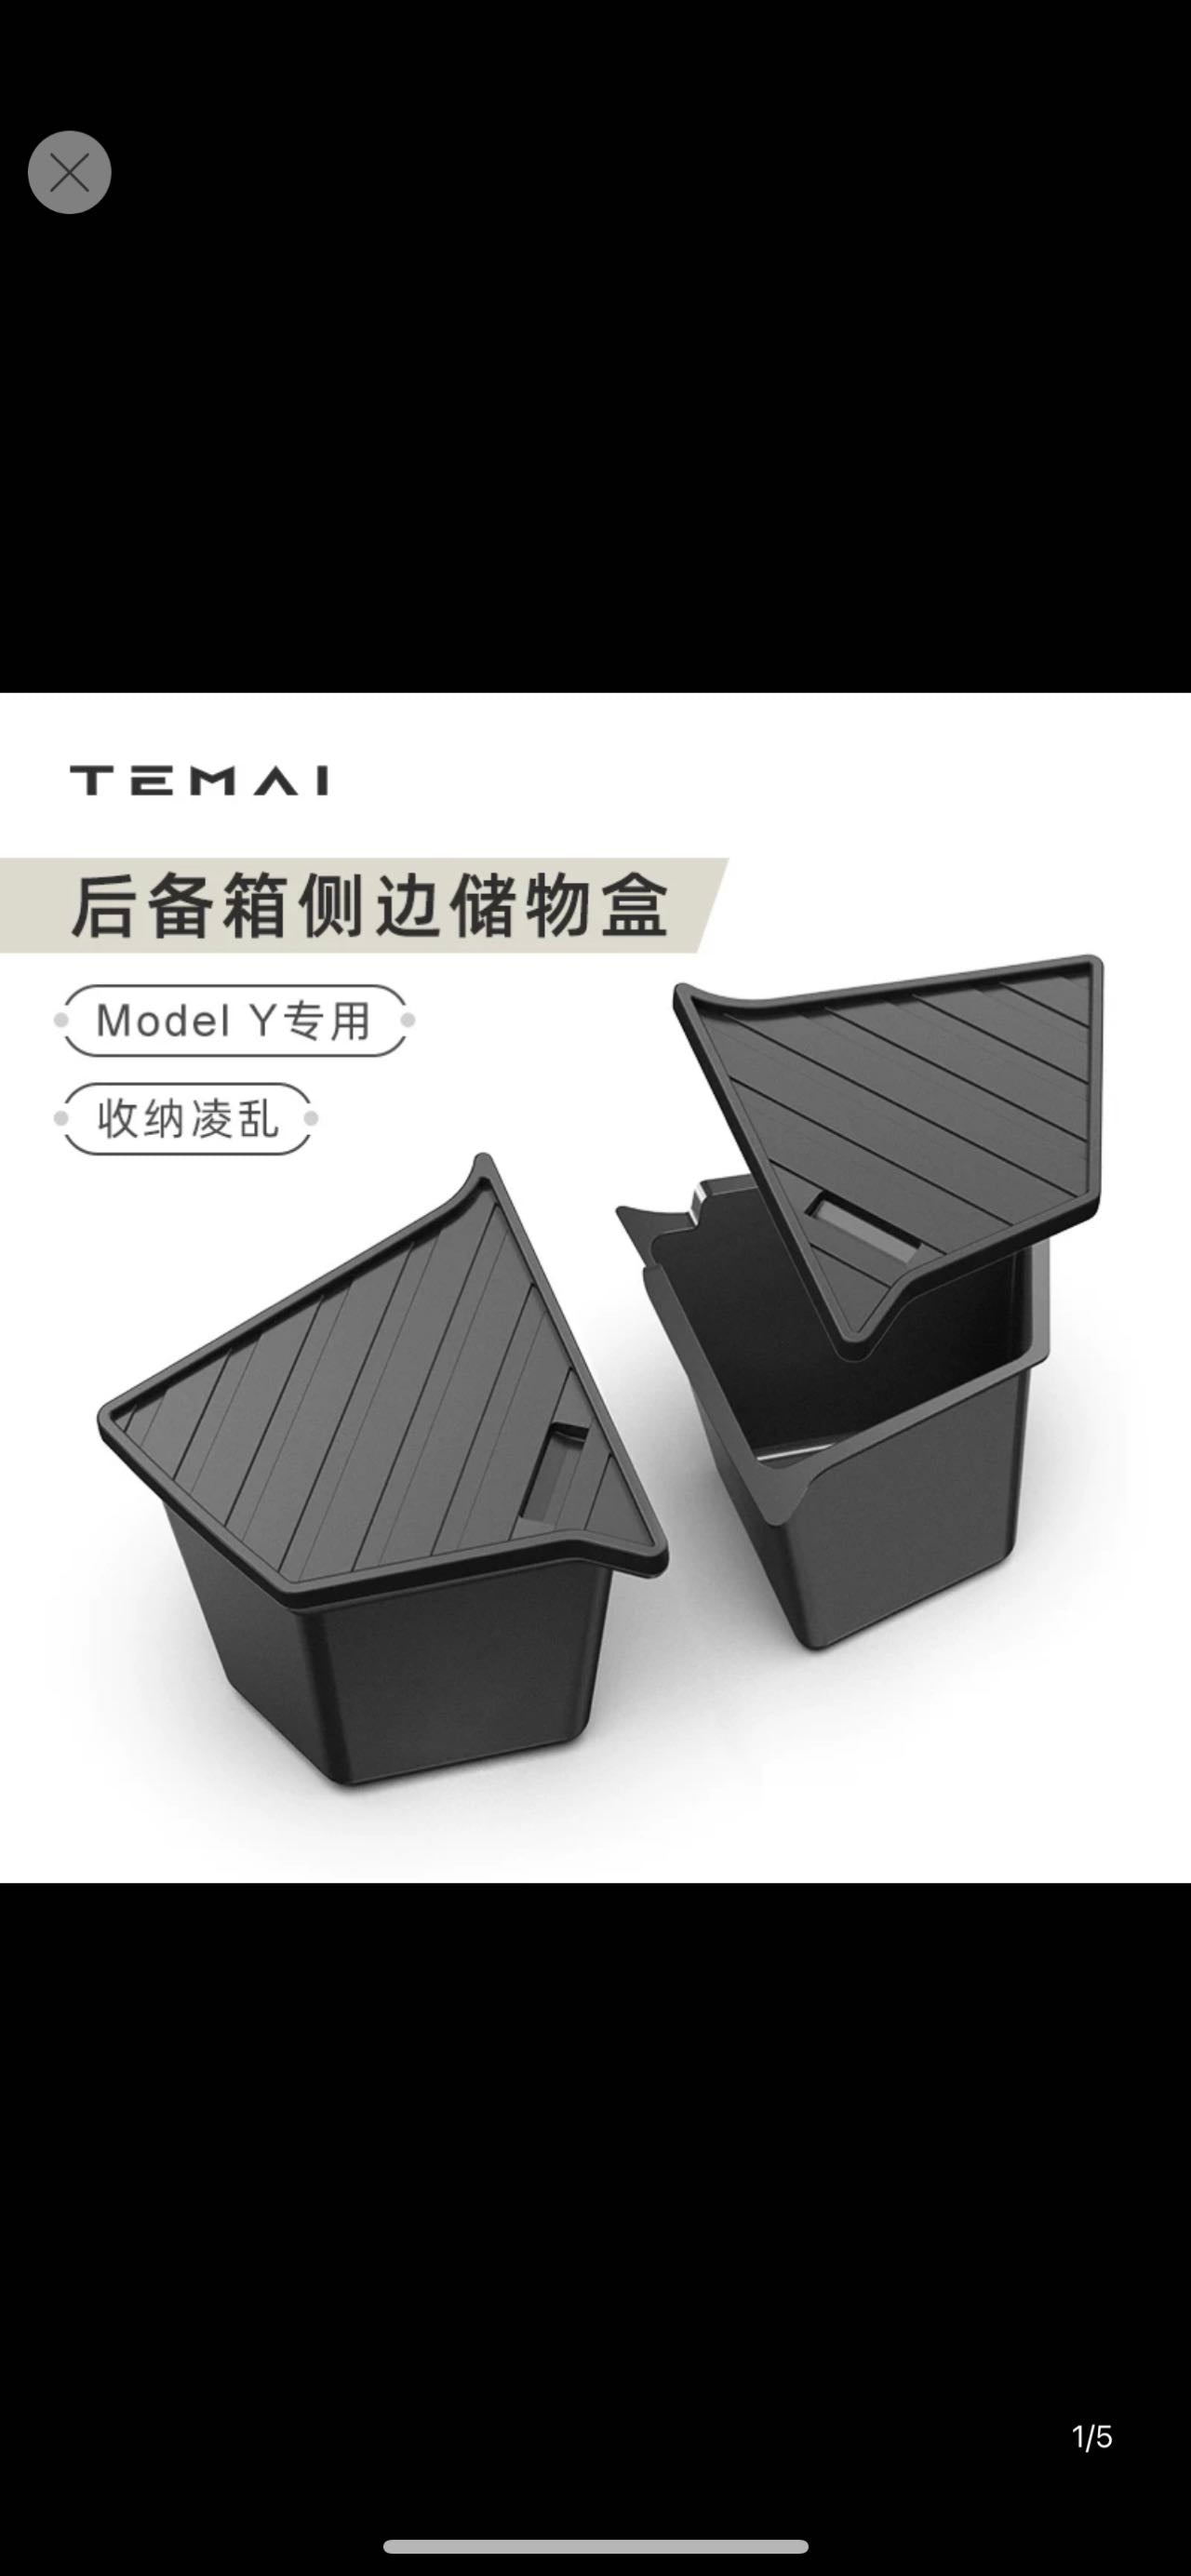 MODEL Y TRUNK STORAGE BINS ONLY MADE IN CHINA